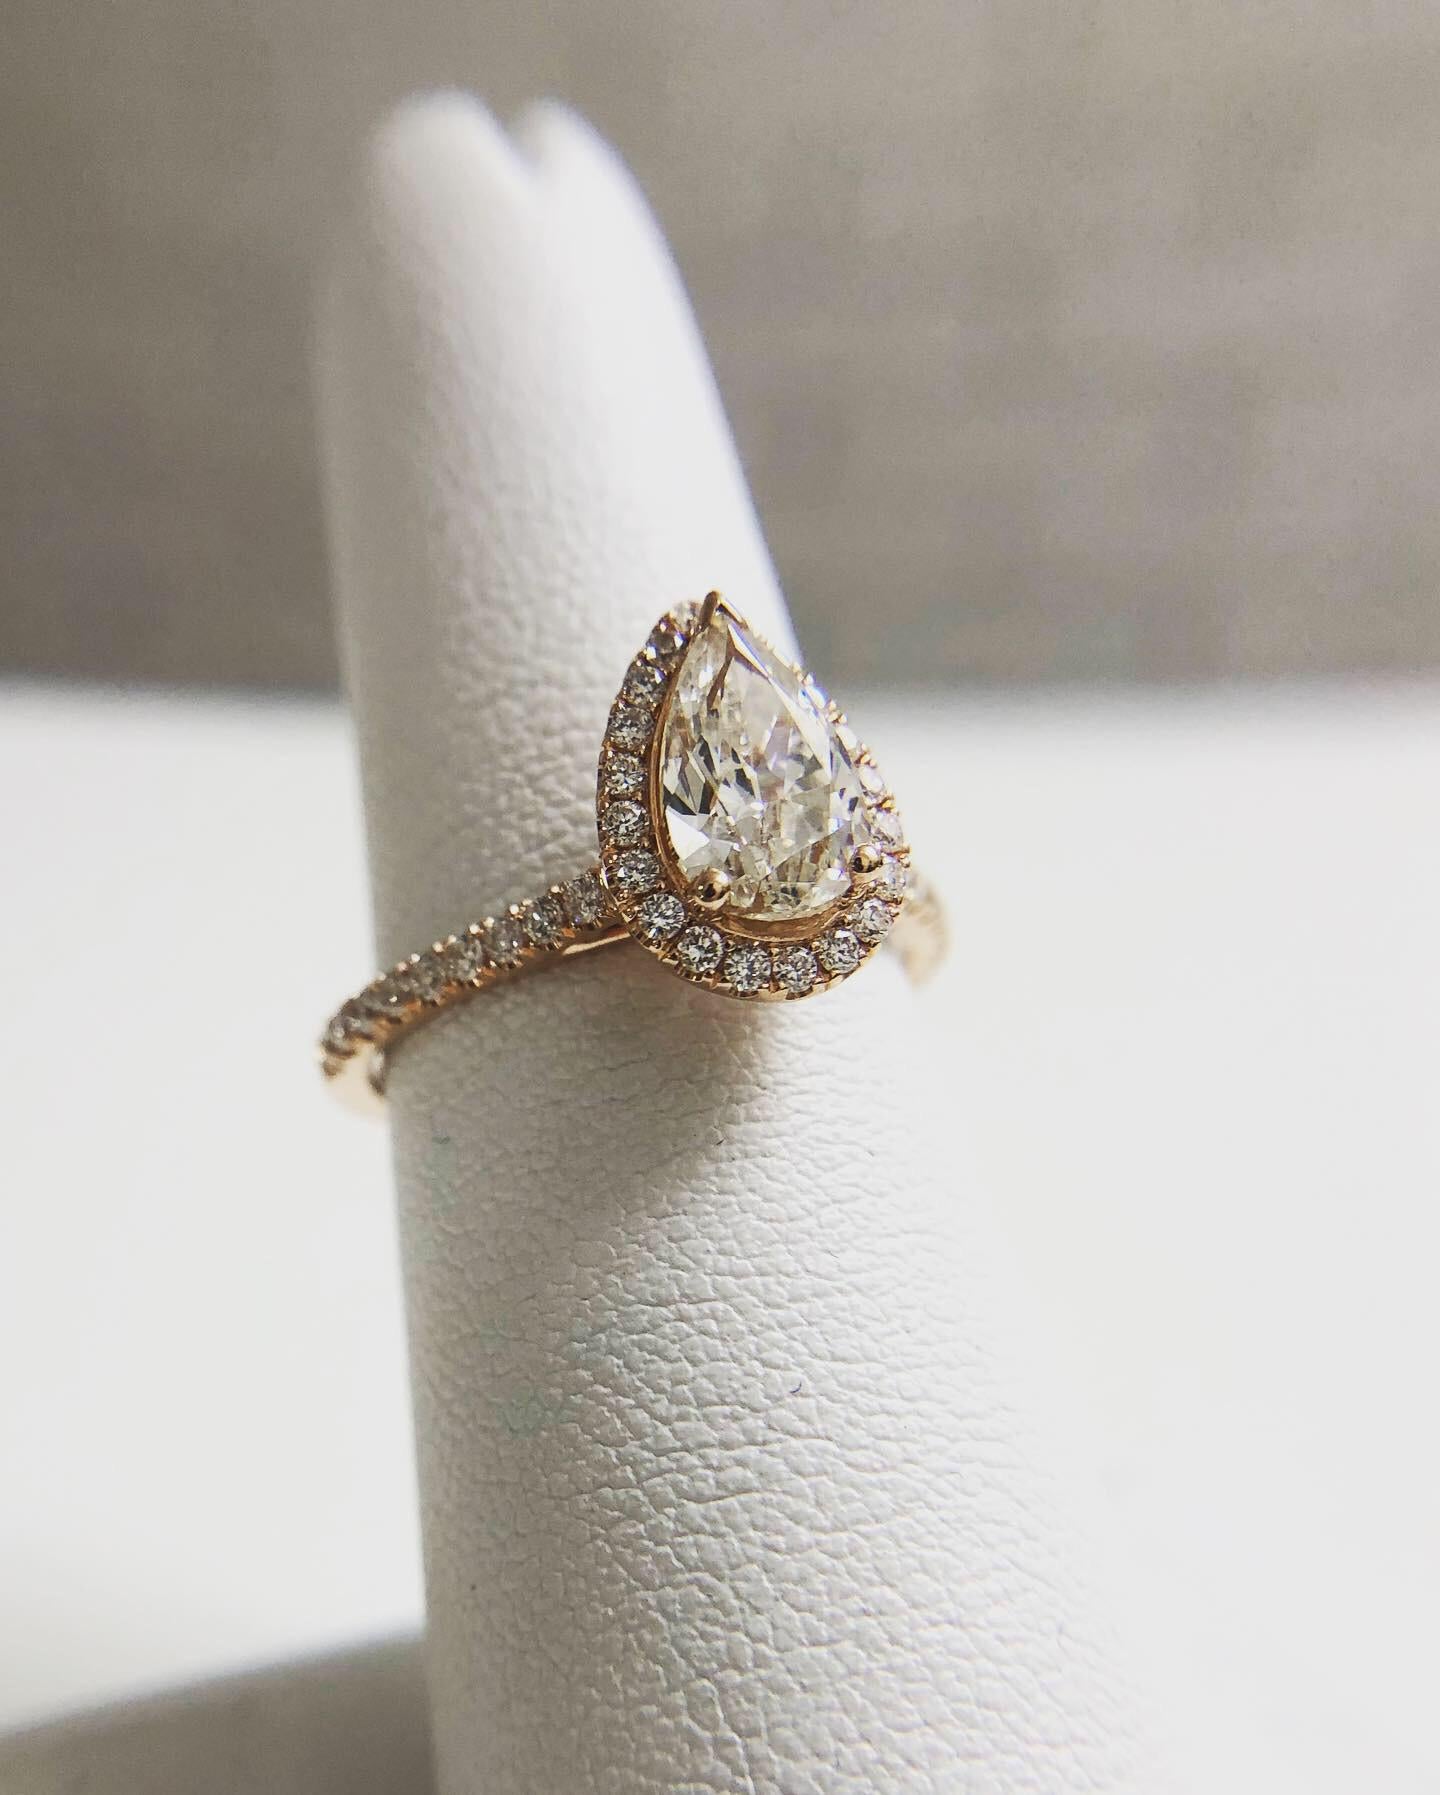 1ct diamond ring 14KT rose gold engagement ring halo diamond ring In New Condition For Sale In Boca Raton, FL